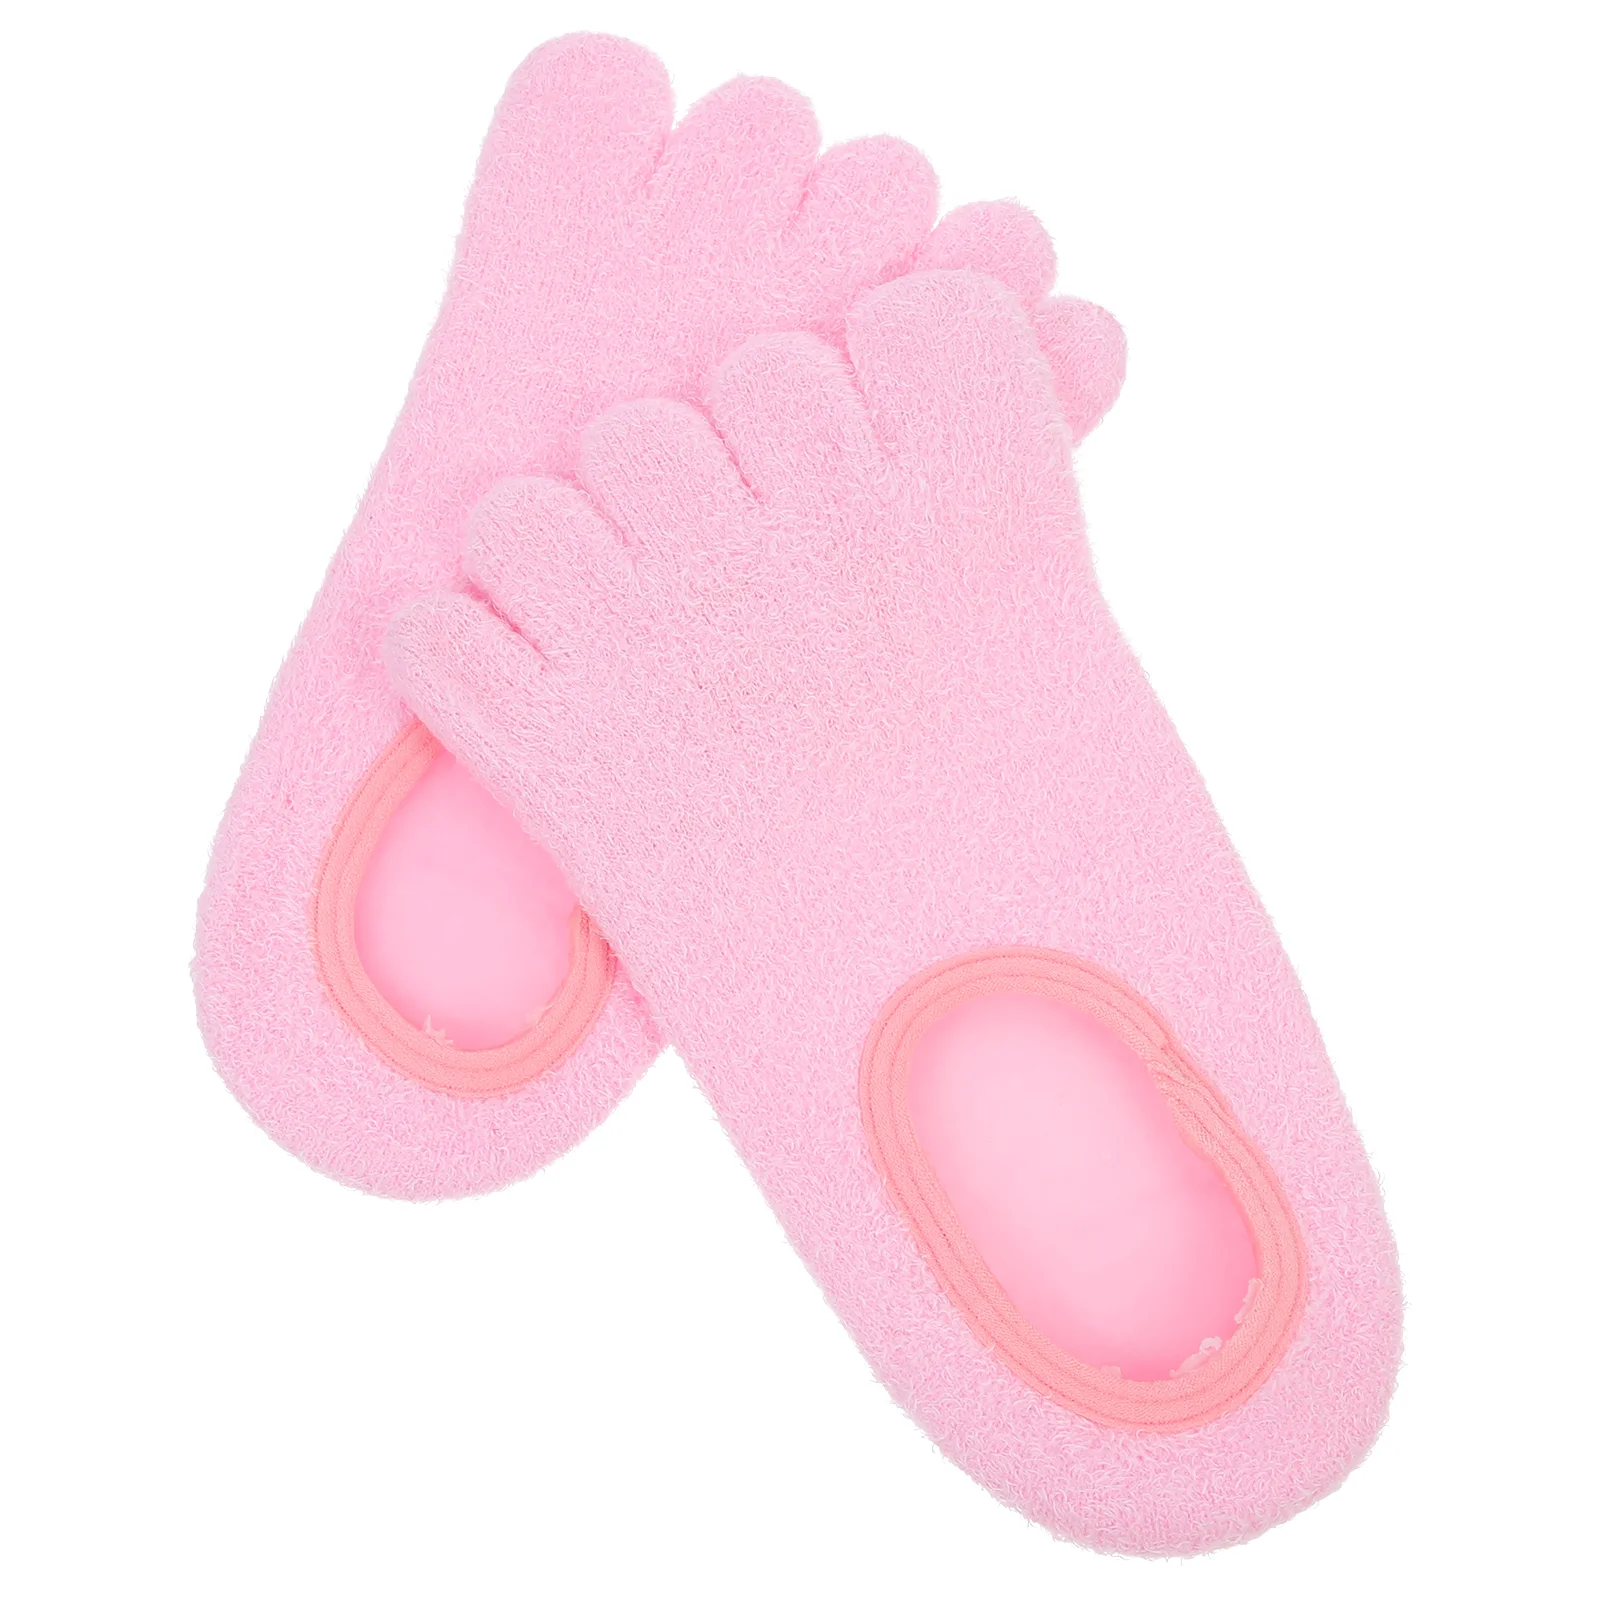 1 Pair Moisturizing Foot Mask Foot Essential Oil Care Products Foot Care Supplies 1 pair five holes half socks forefoot cushion protective foot paw foot care supplies for ballet size s